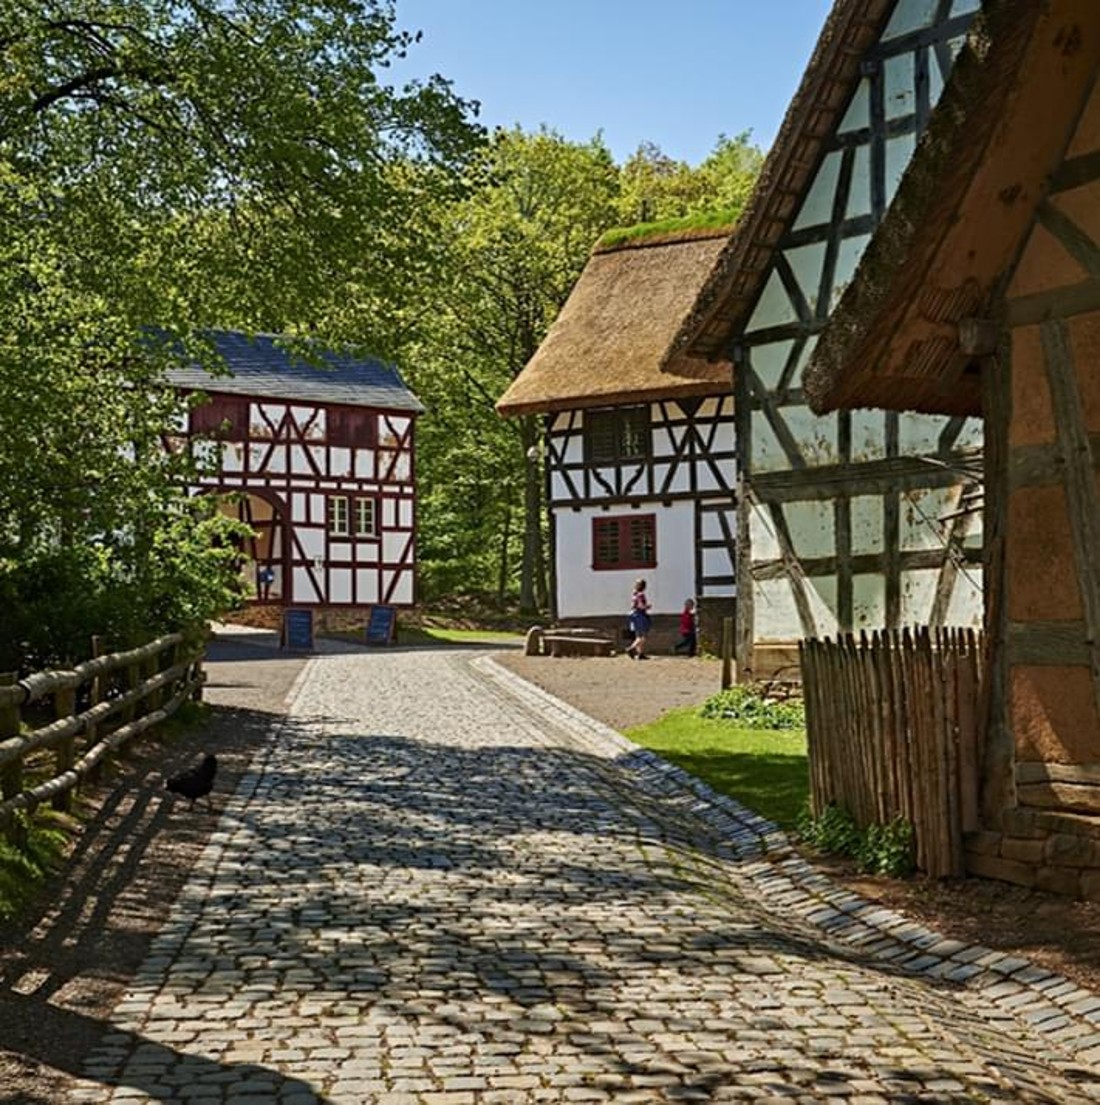 Cobblestone path, half-timbered houses on the right